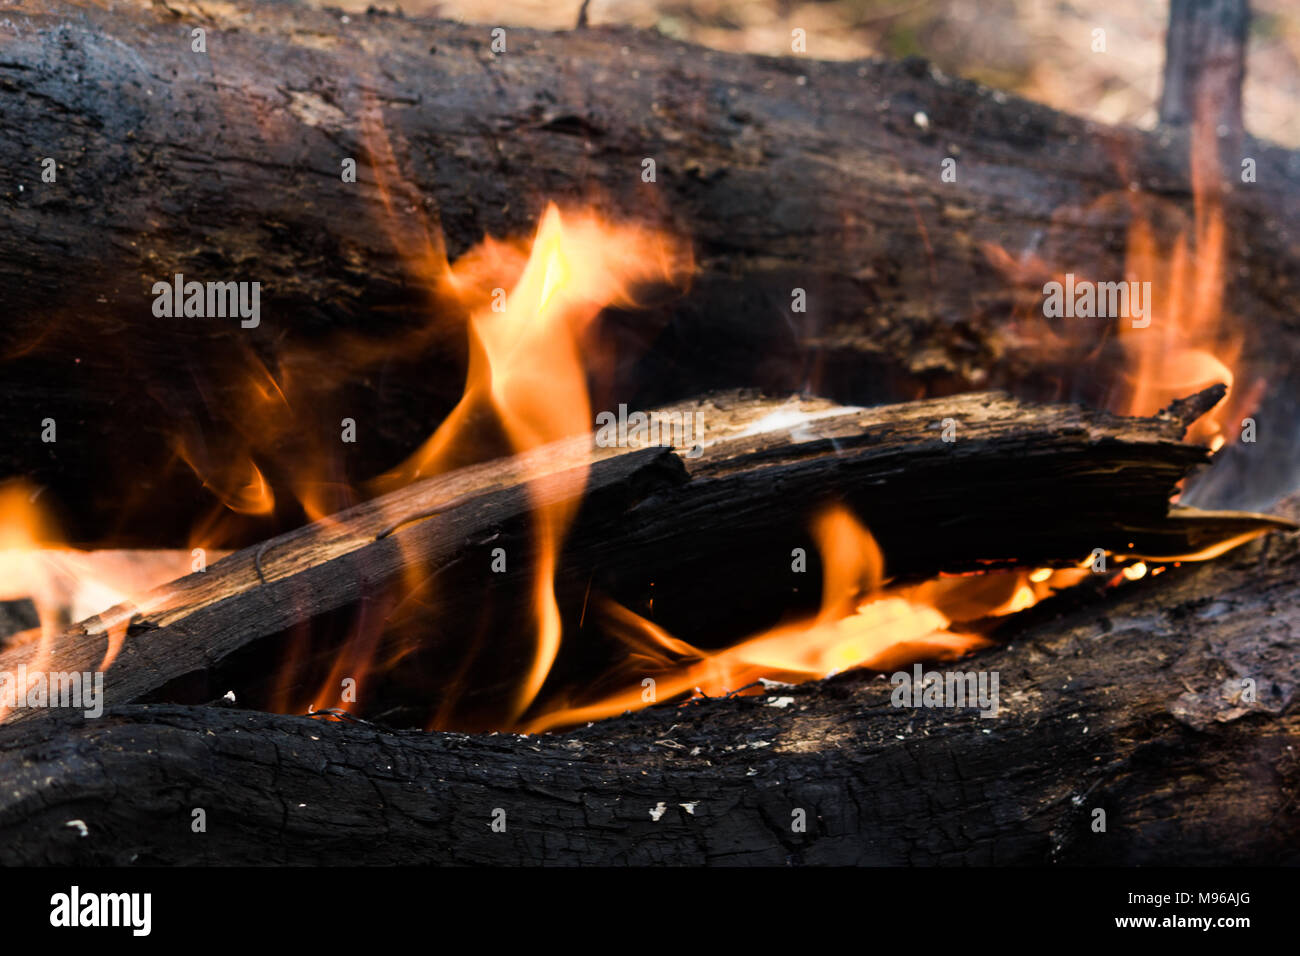 A large forest fire burns in the woods Stock Photo